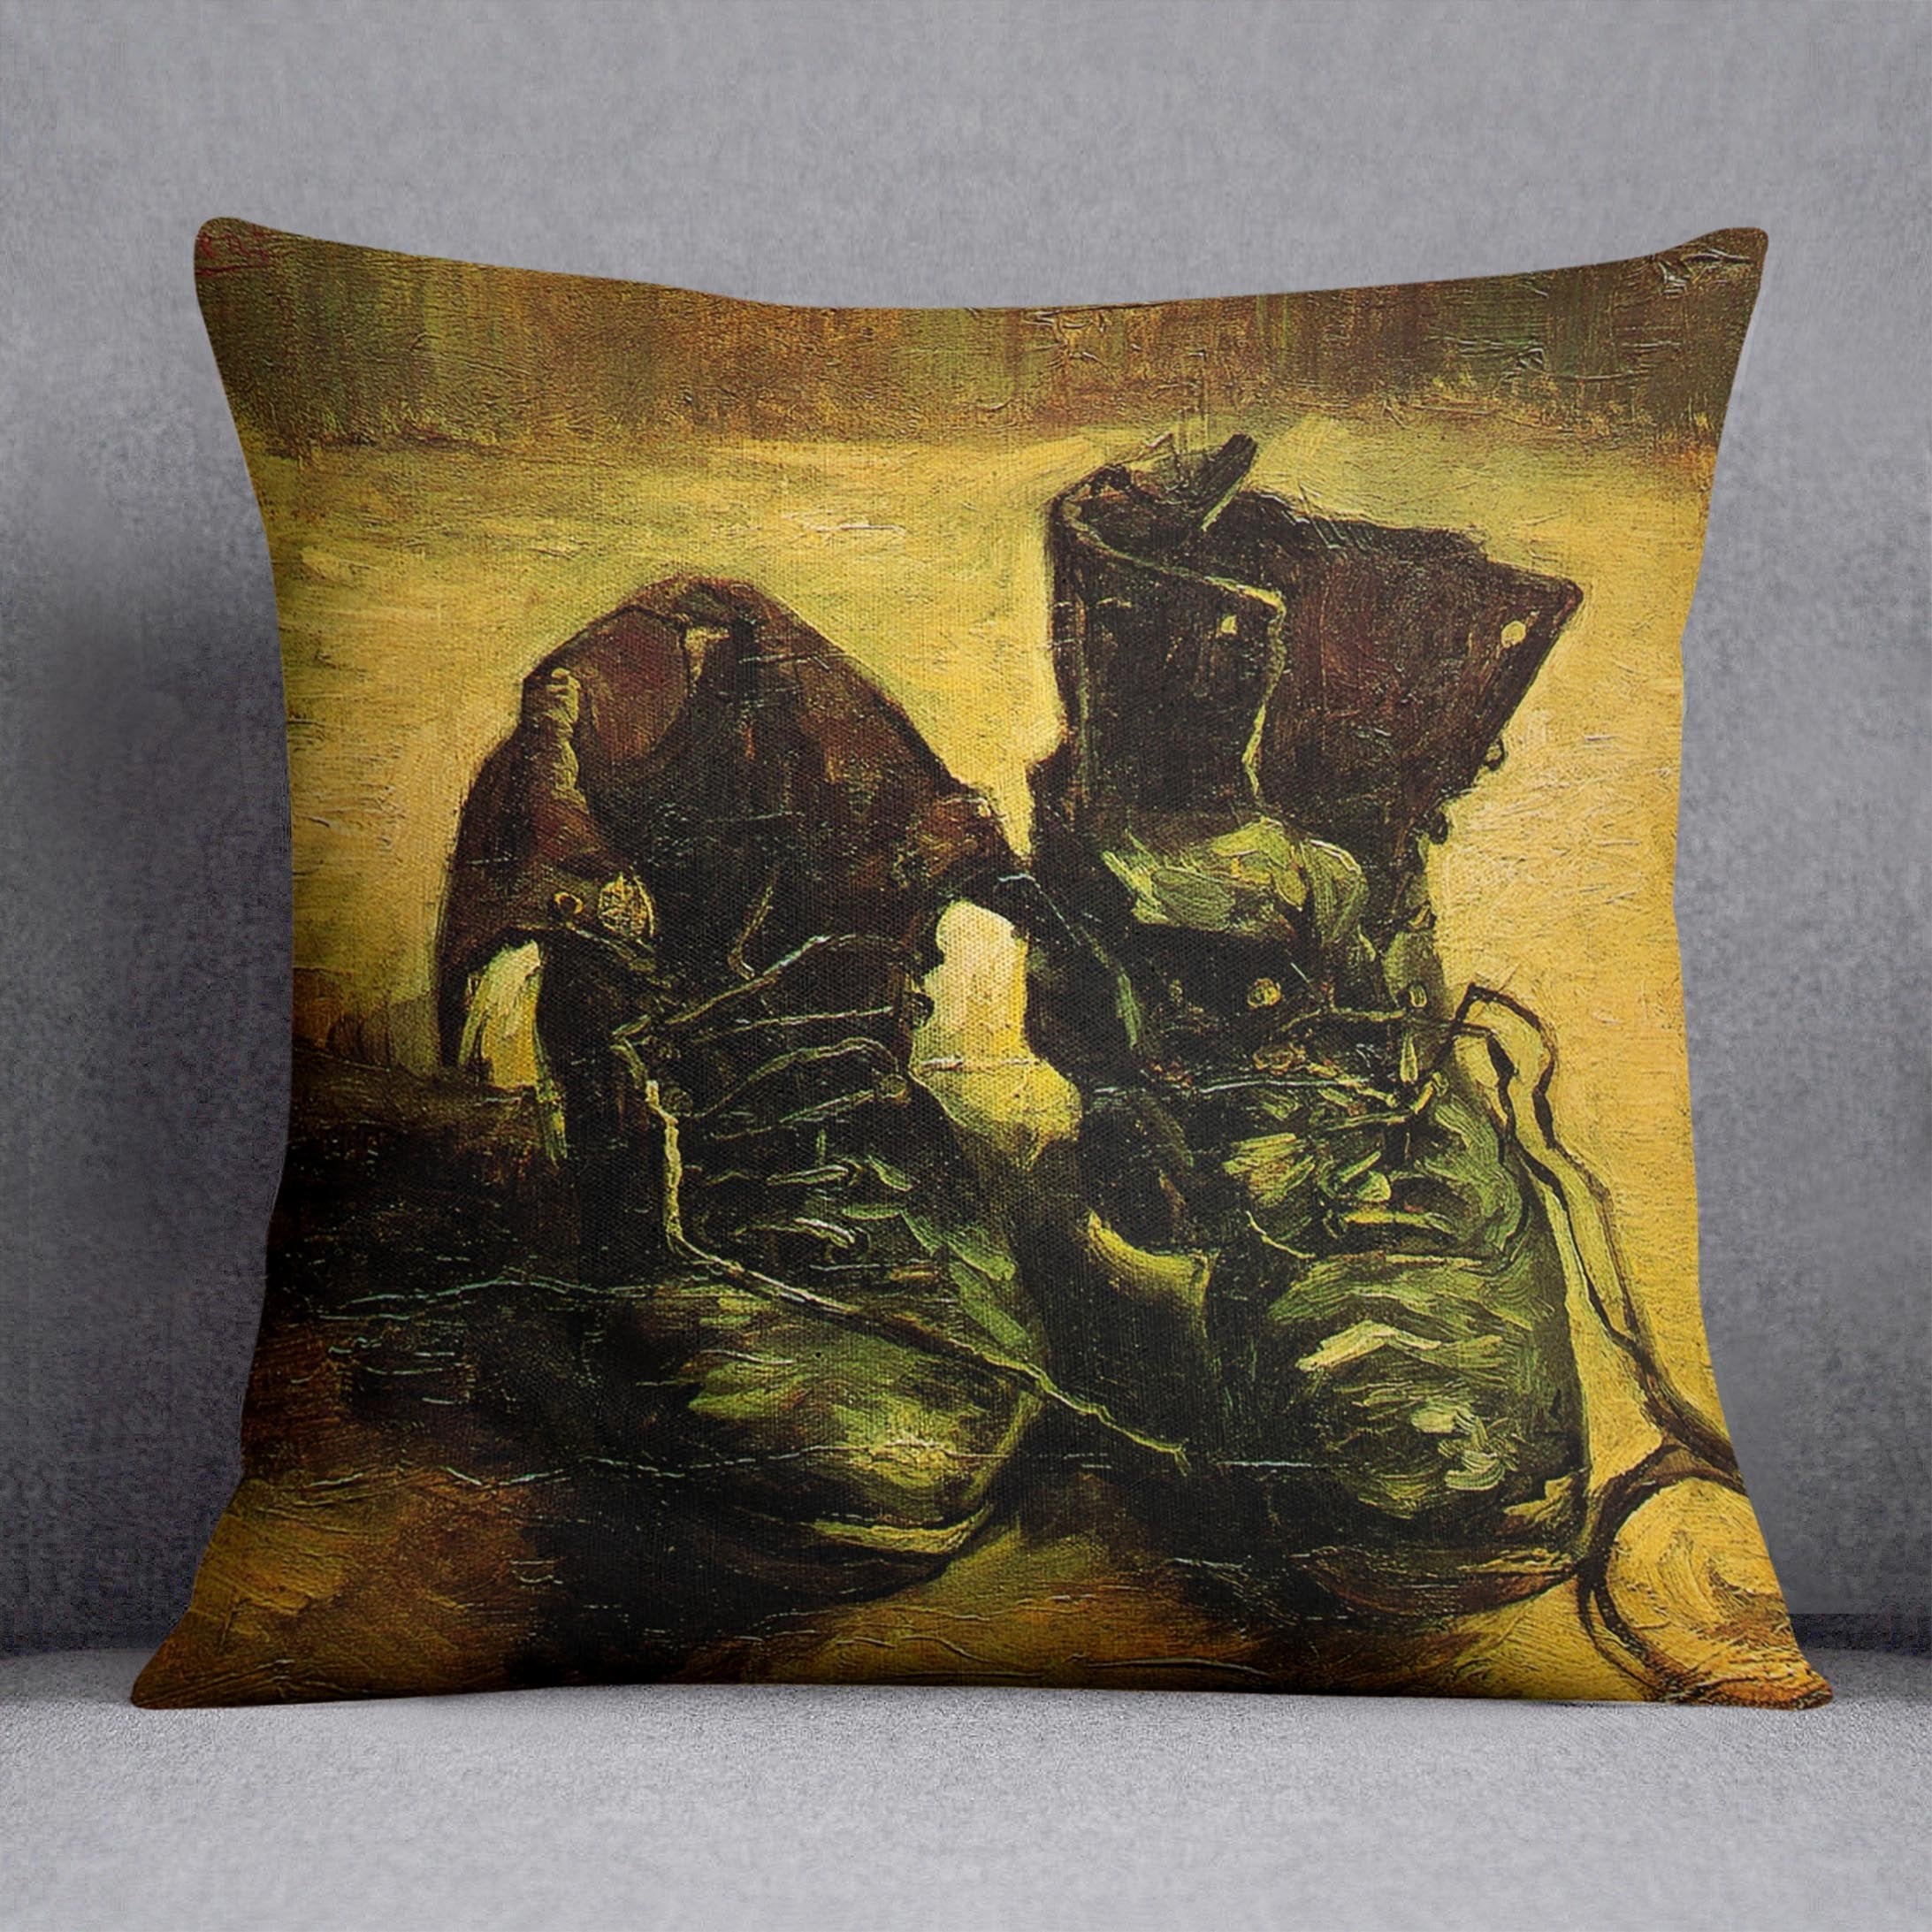 A Pair of Shoes 2 by Van Gogh Throw Pillow